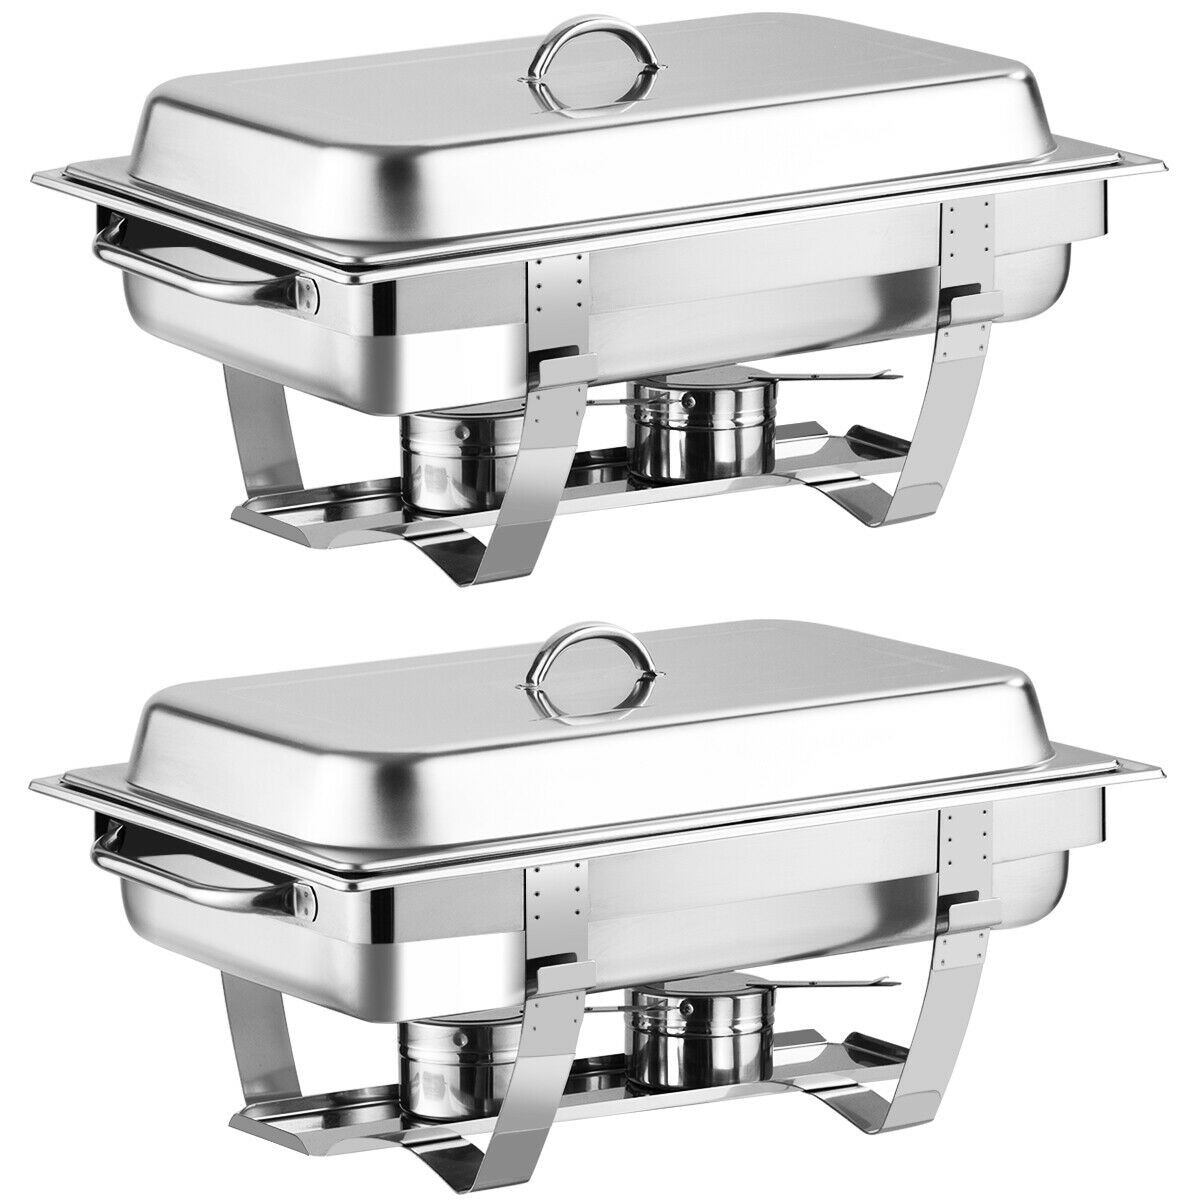 Electric Chafing Dish 9QT Chafer Catering Buffet Warmer Tray Party